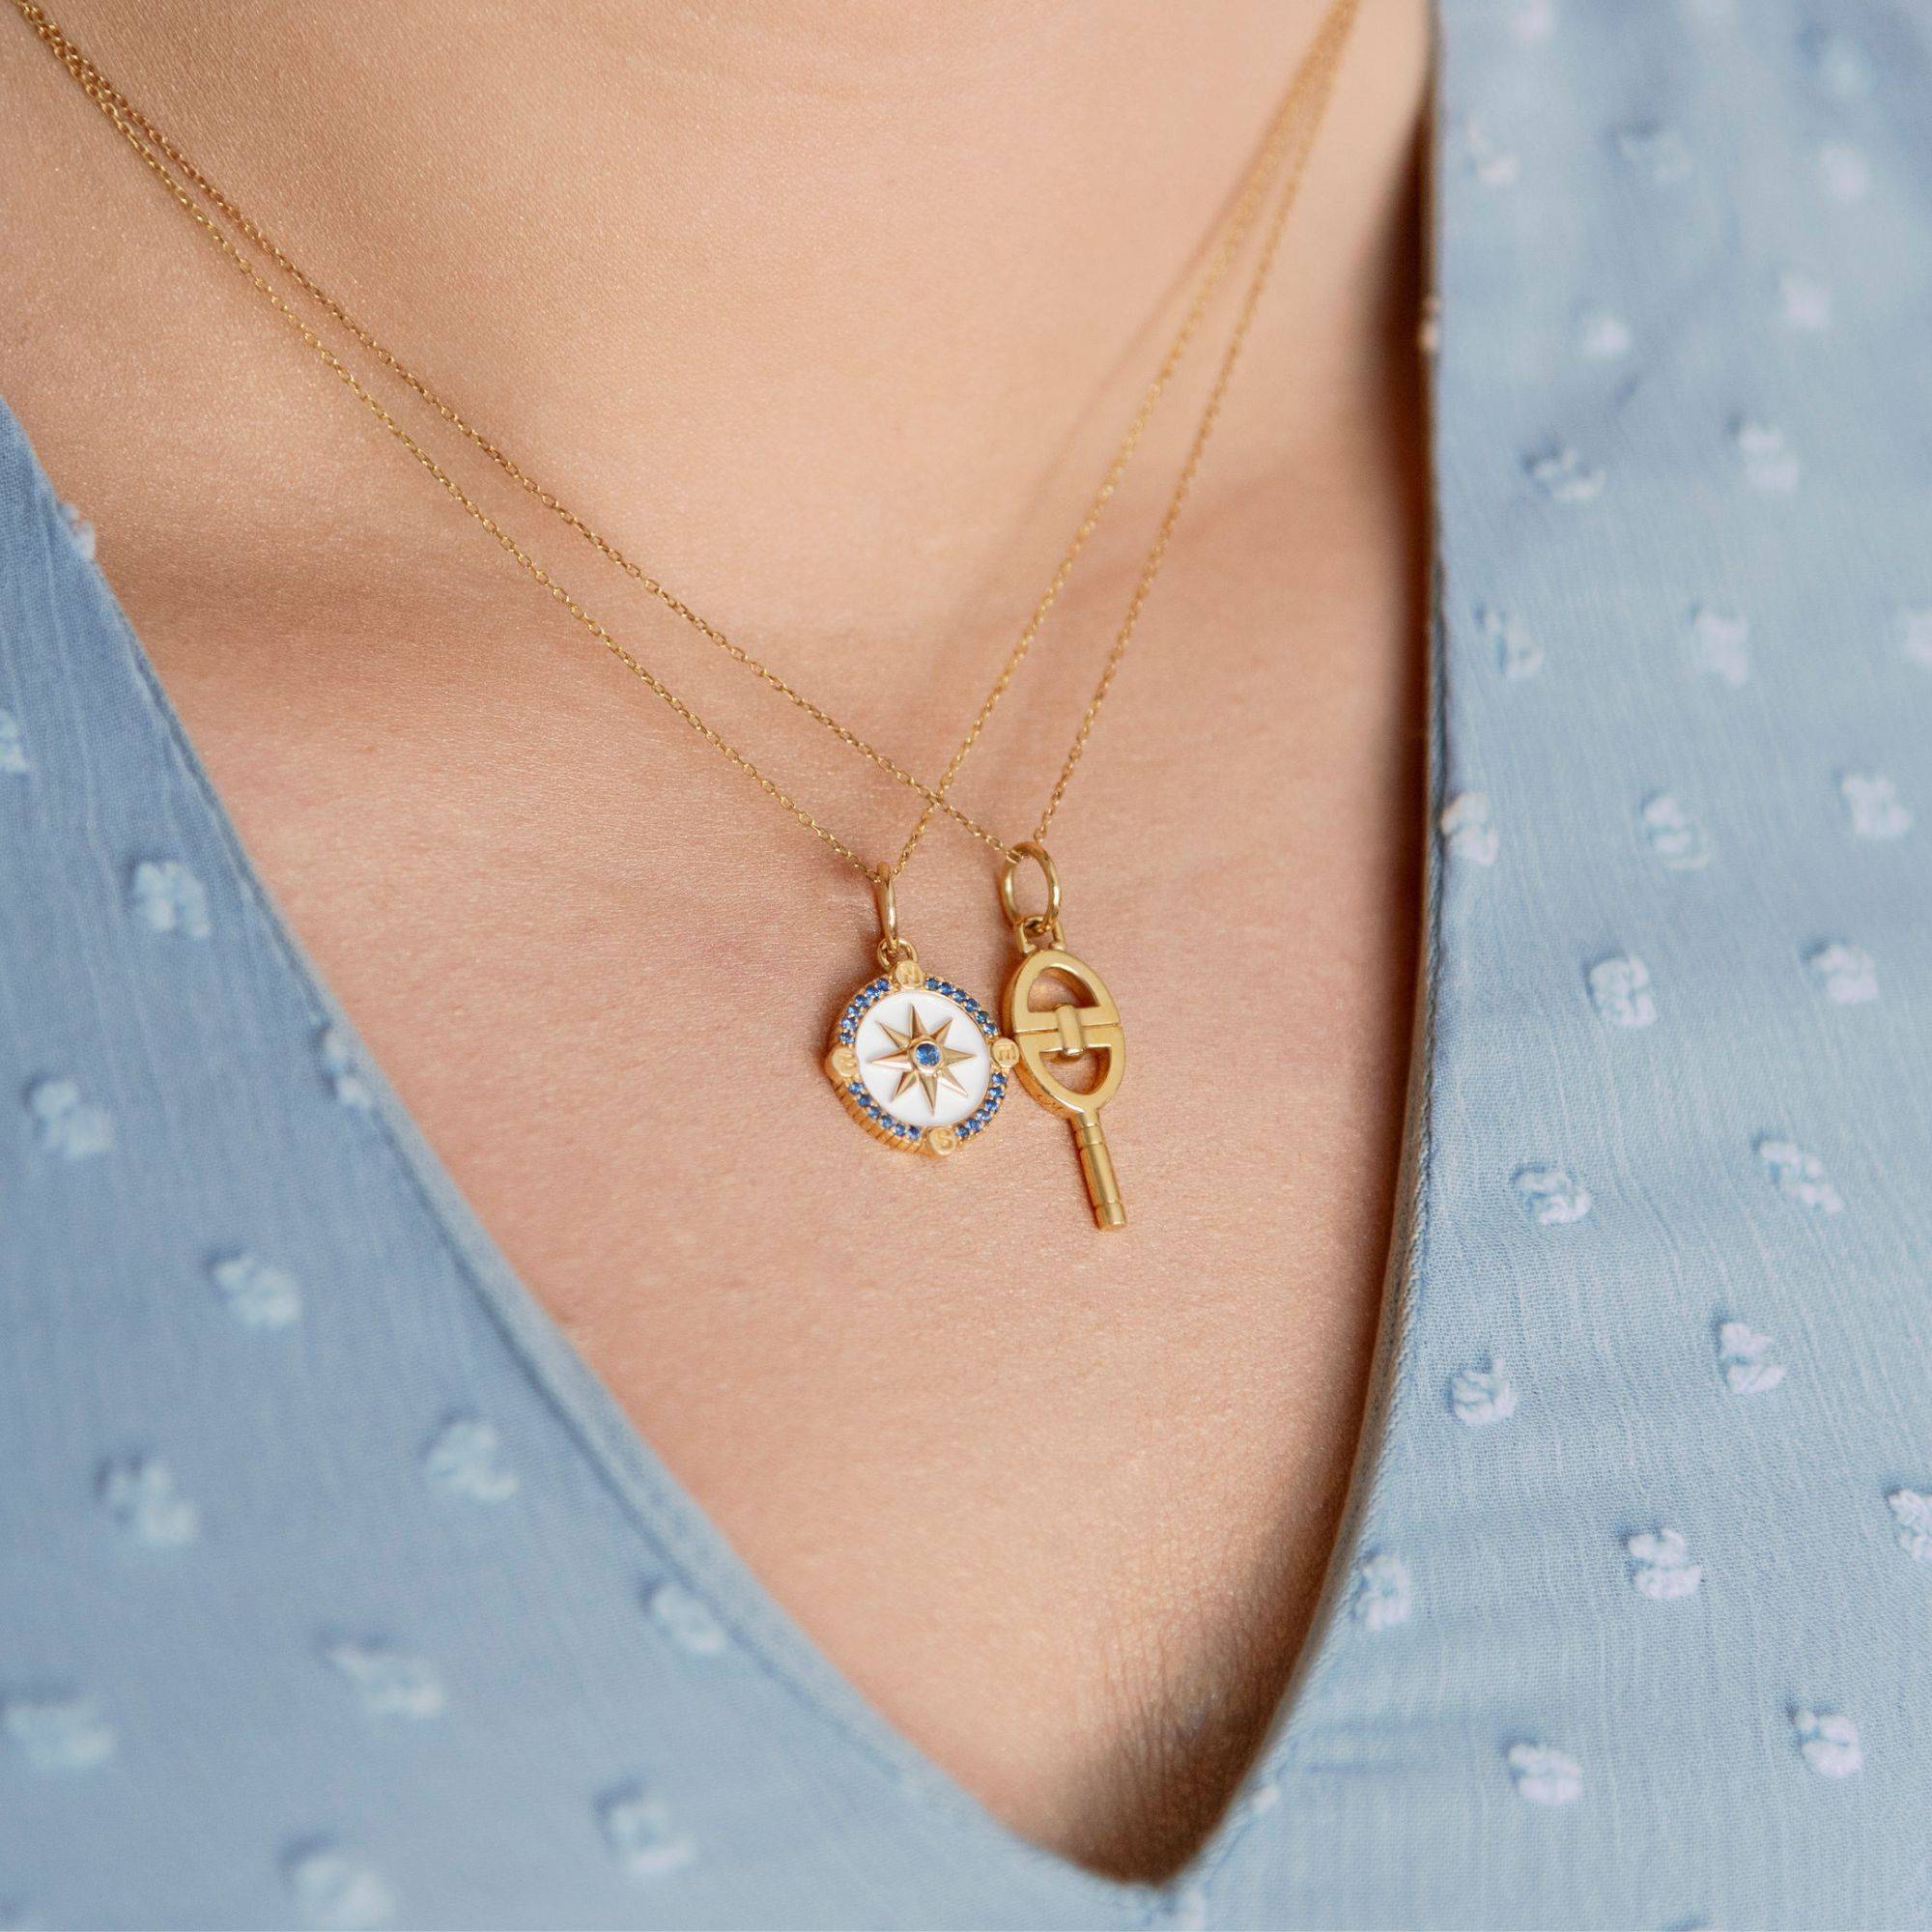 WOMAN WEARING TWO YELLOW GOLD CHARM NECKLACES